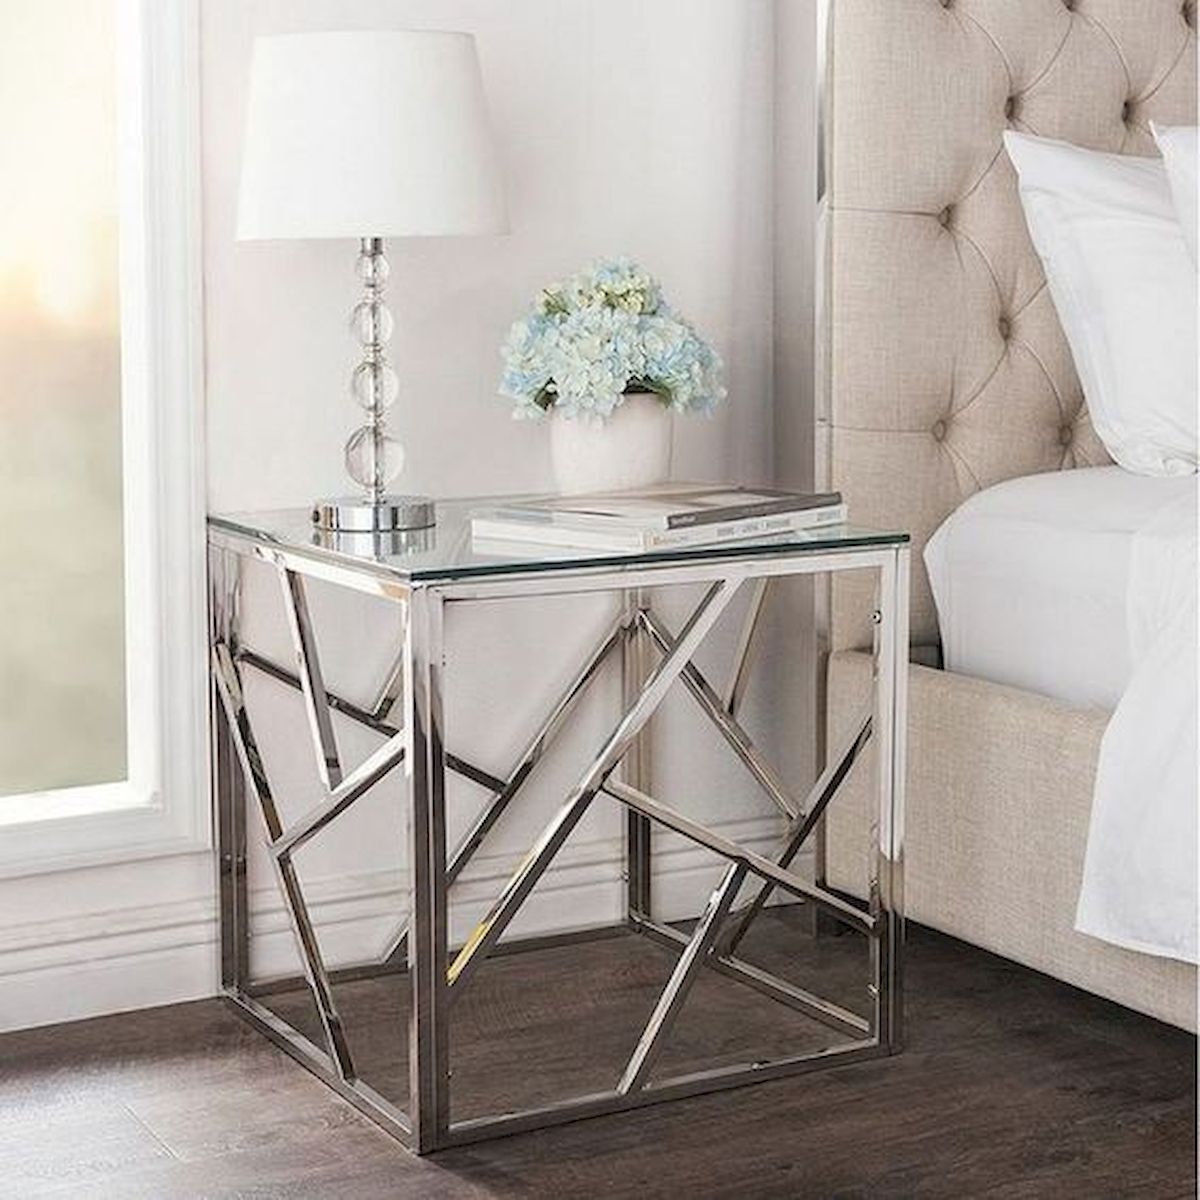 40 Awesome Modern Glass Coffee Table Design Ideas For Your Living Room (40)